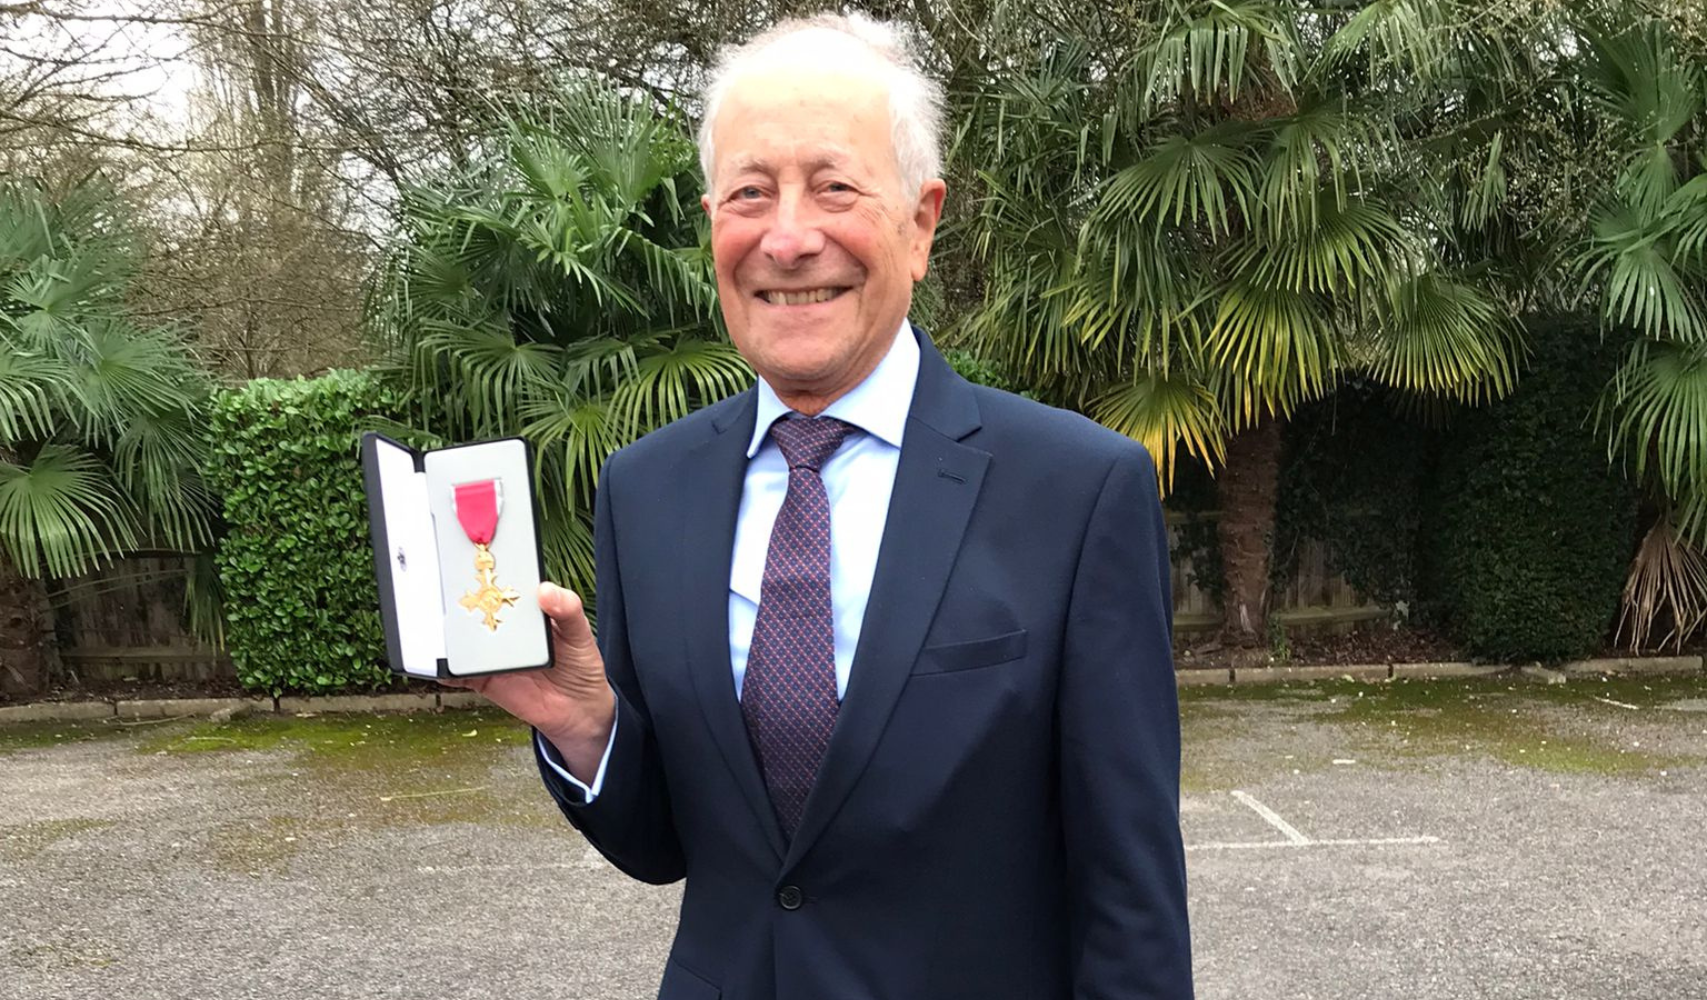 Joint President of Rennie Grove Peace receives OBE at Windsor Castle